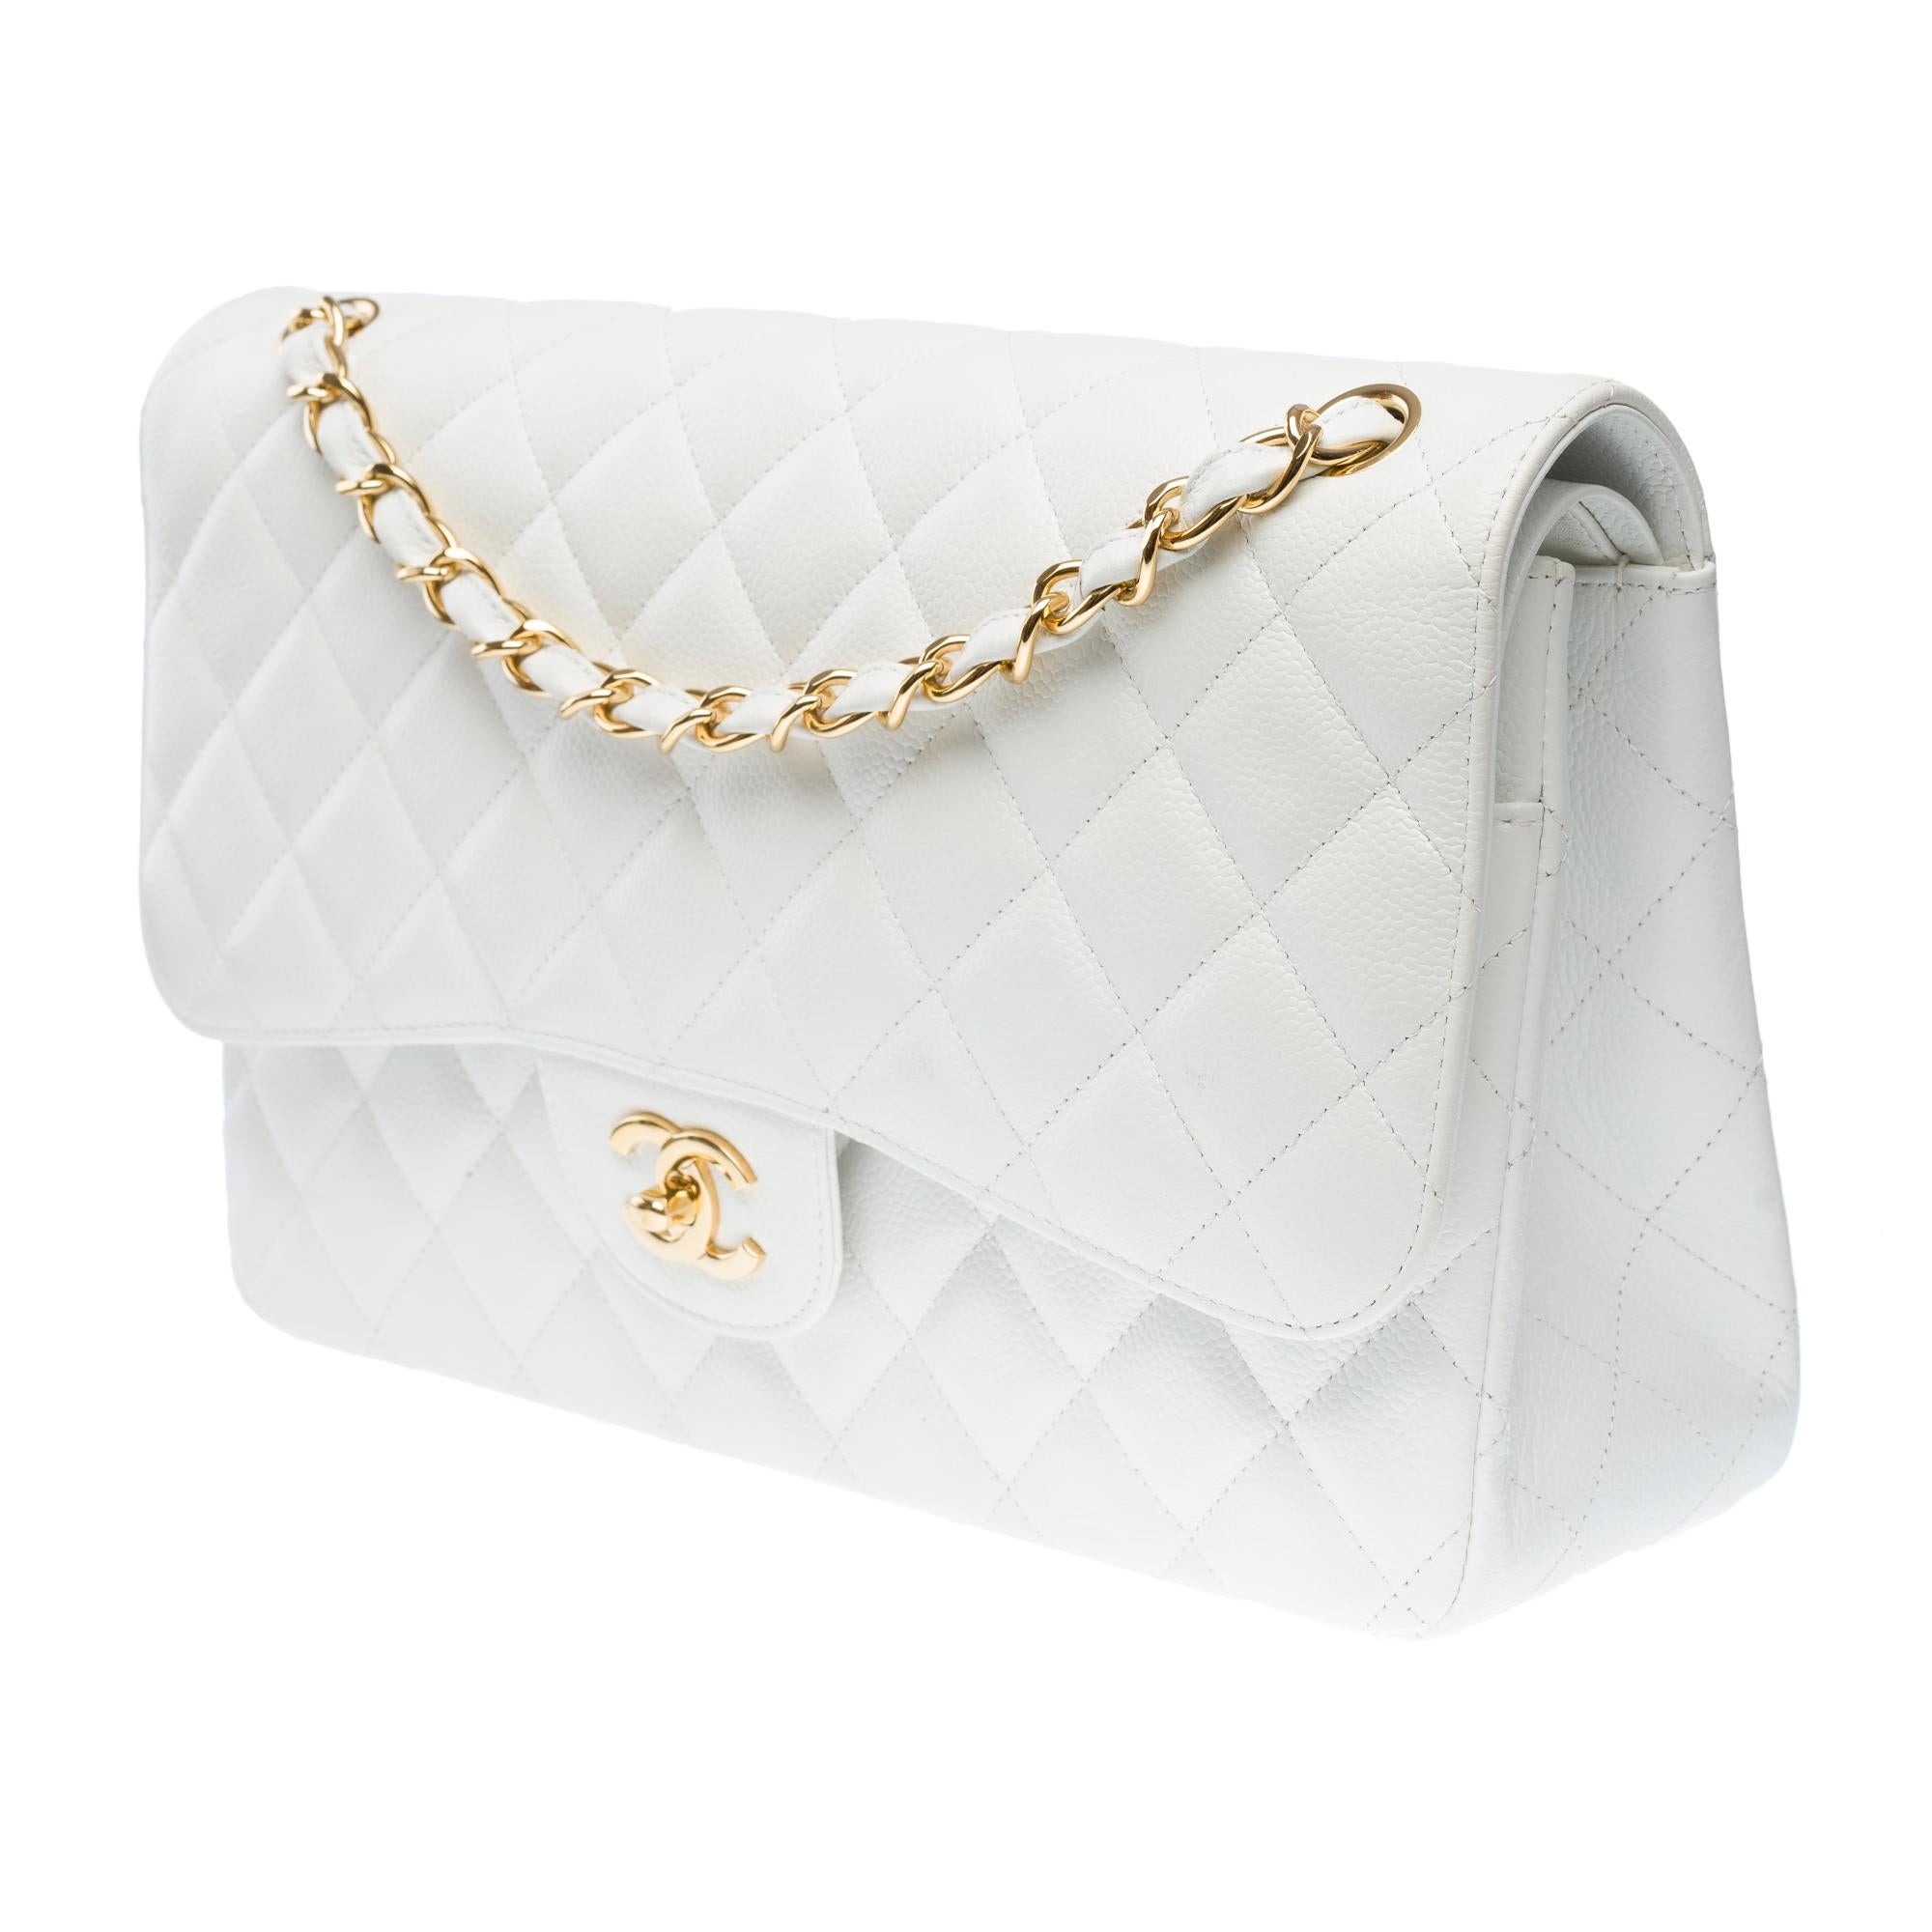 Women's Chanel Timeless Jumbo double flap bag in White quilted Caviar leather, GHW For Sale